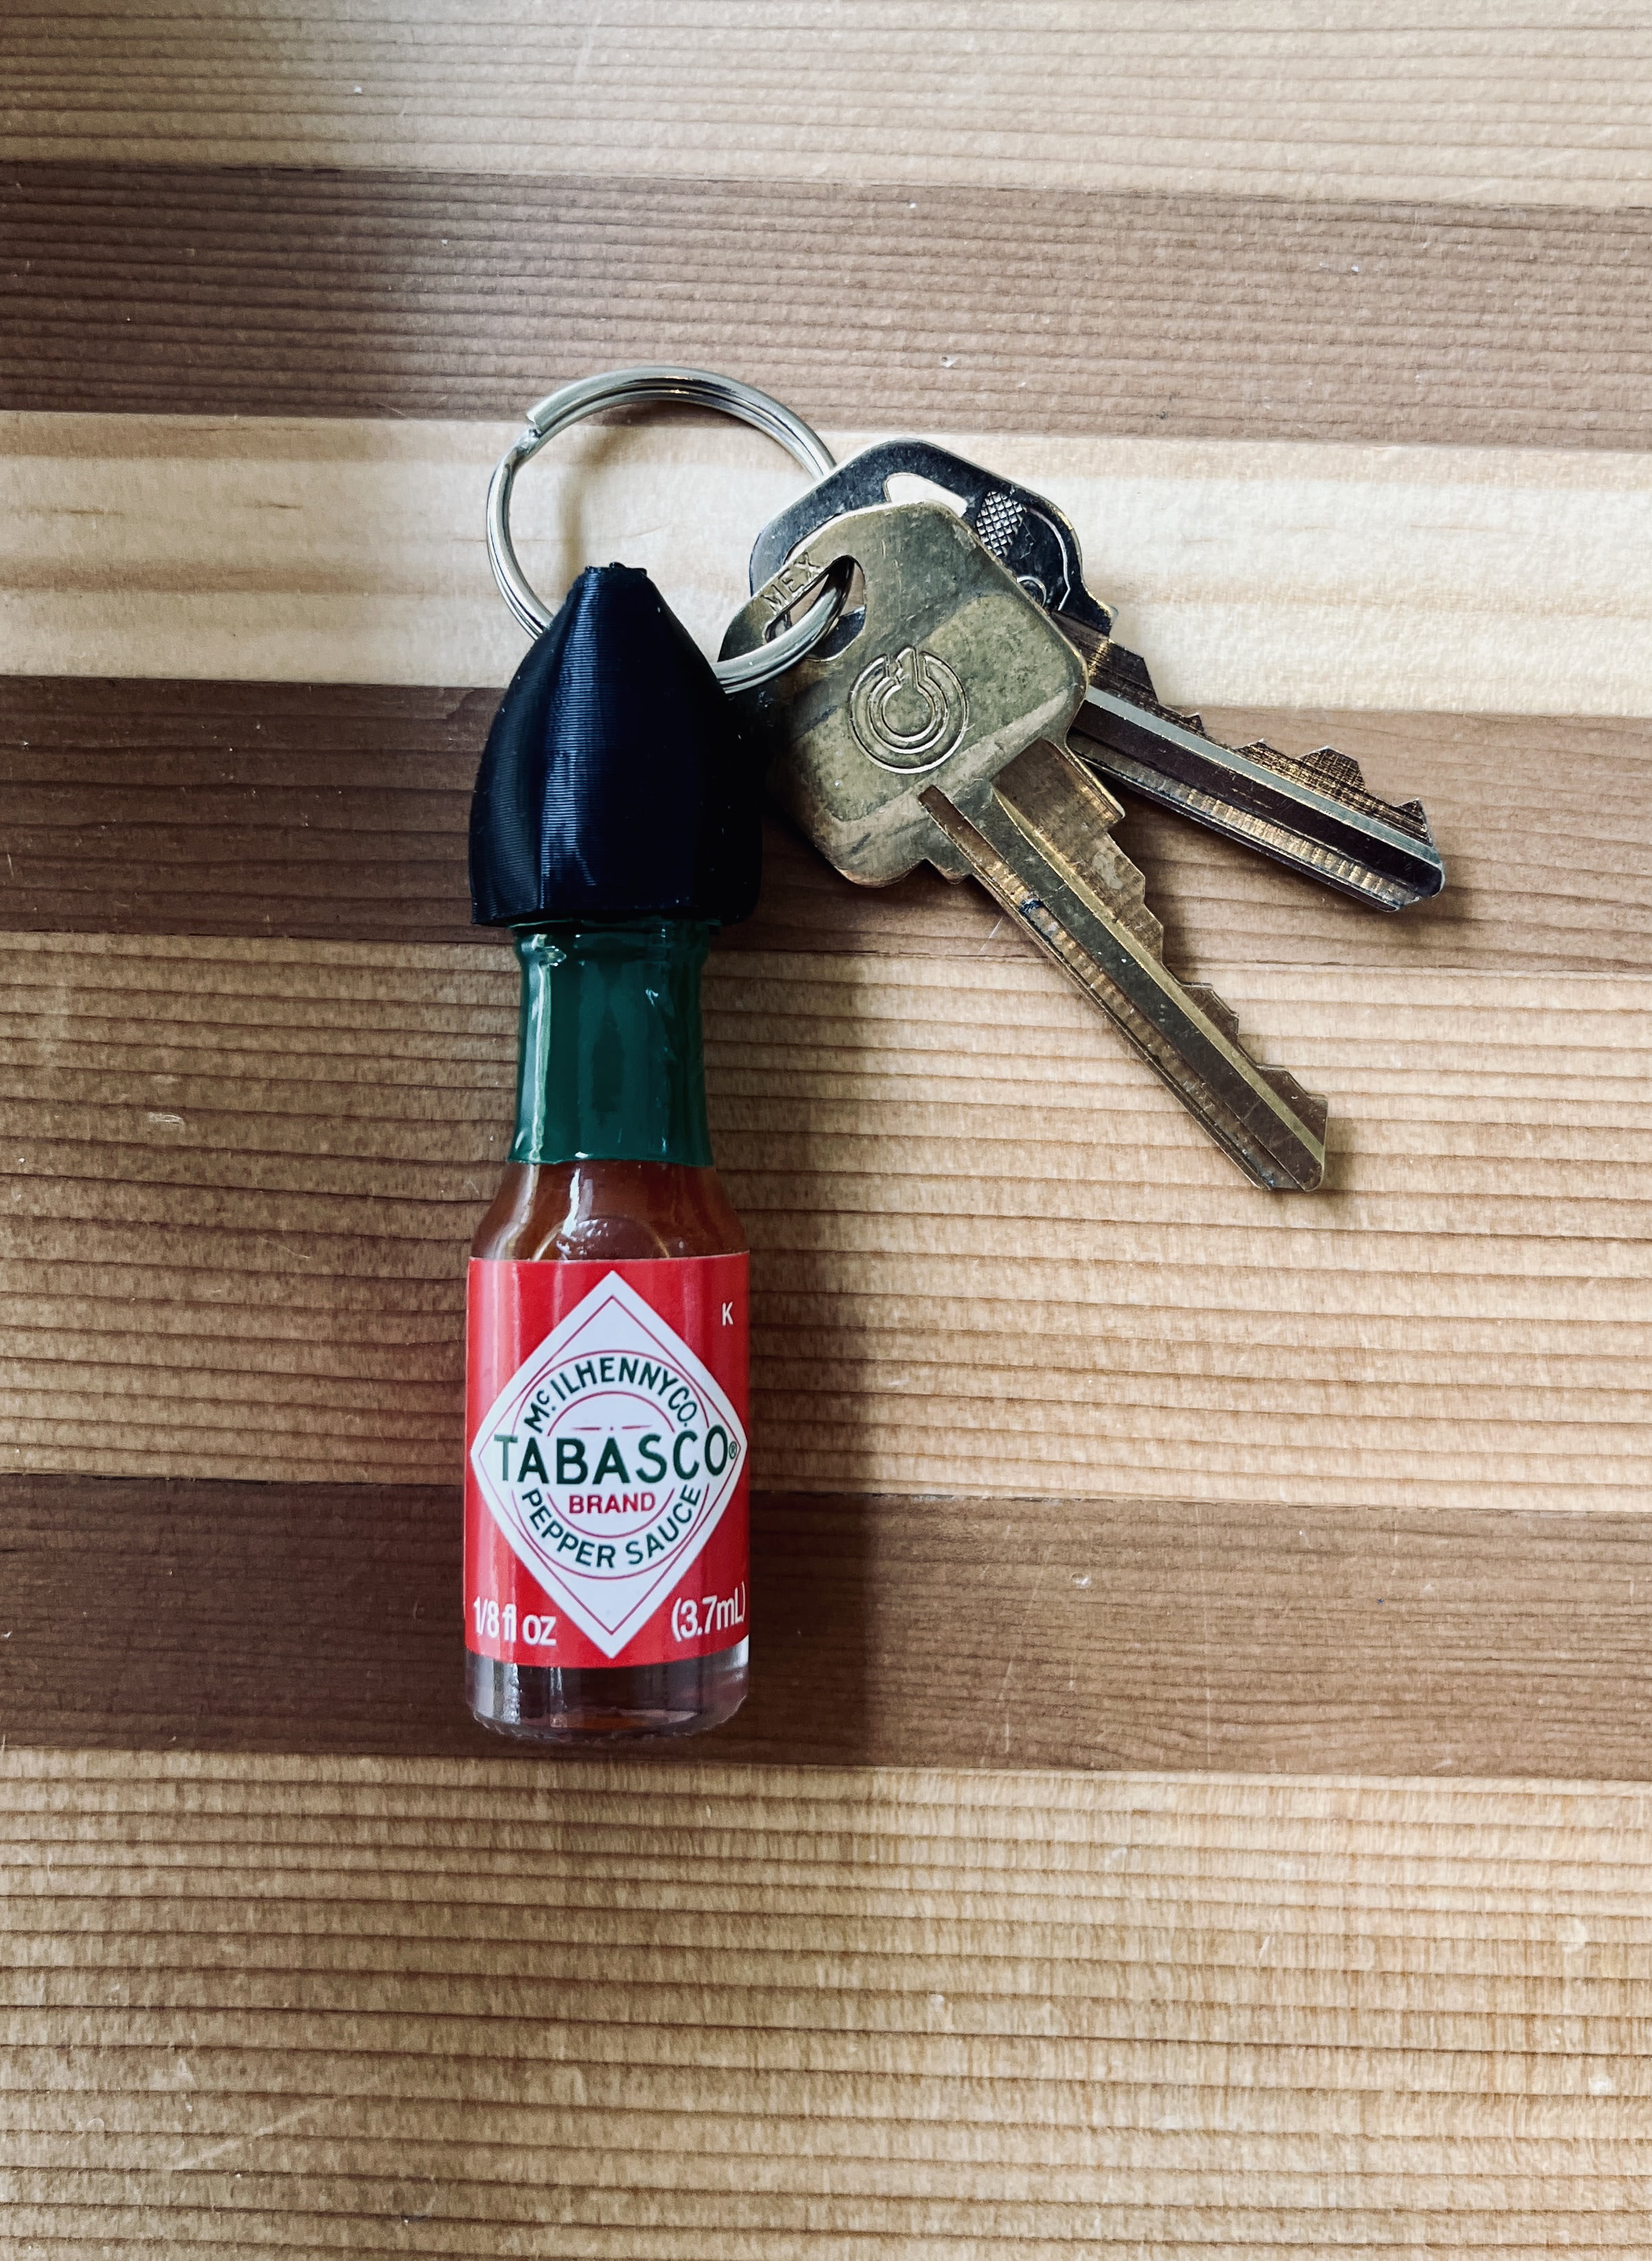 Atlantic Rush Mini Tabasco Hot Sauce Keychain - Includes 3 Mini Hot Sauce Bottles (.35oz) with Travel Hot Sauce Key Chain and Refill Funnel - Red